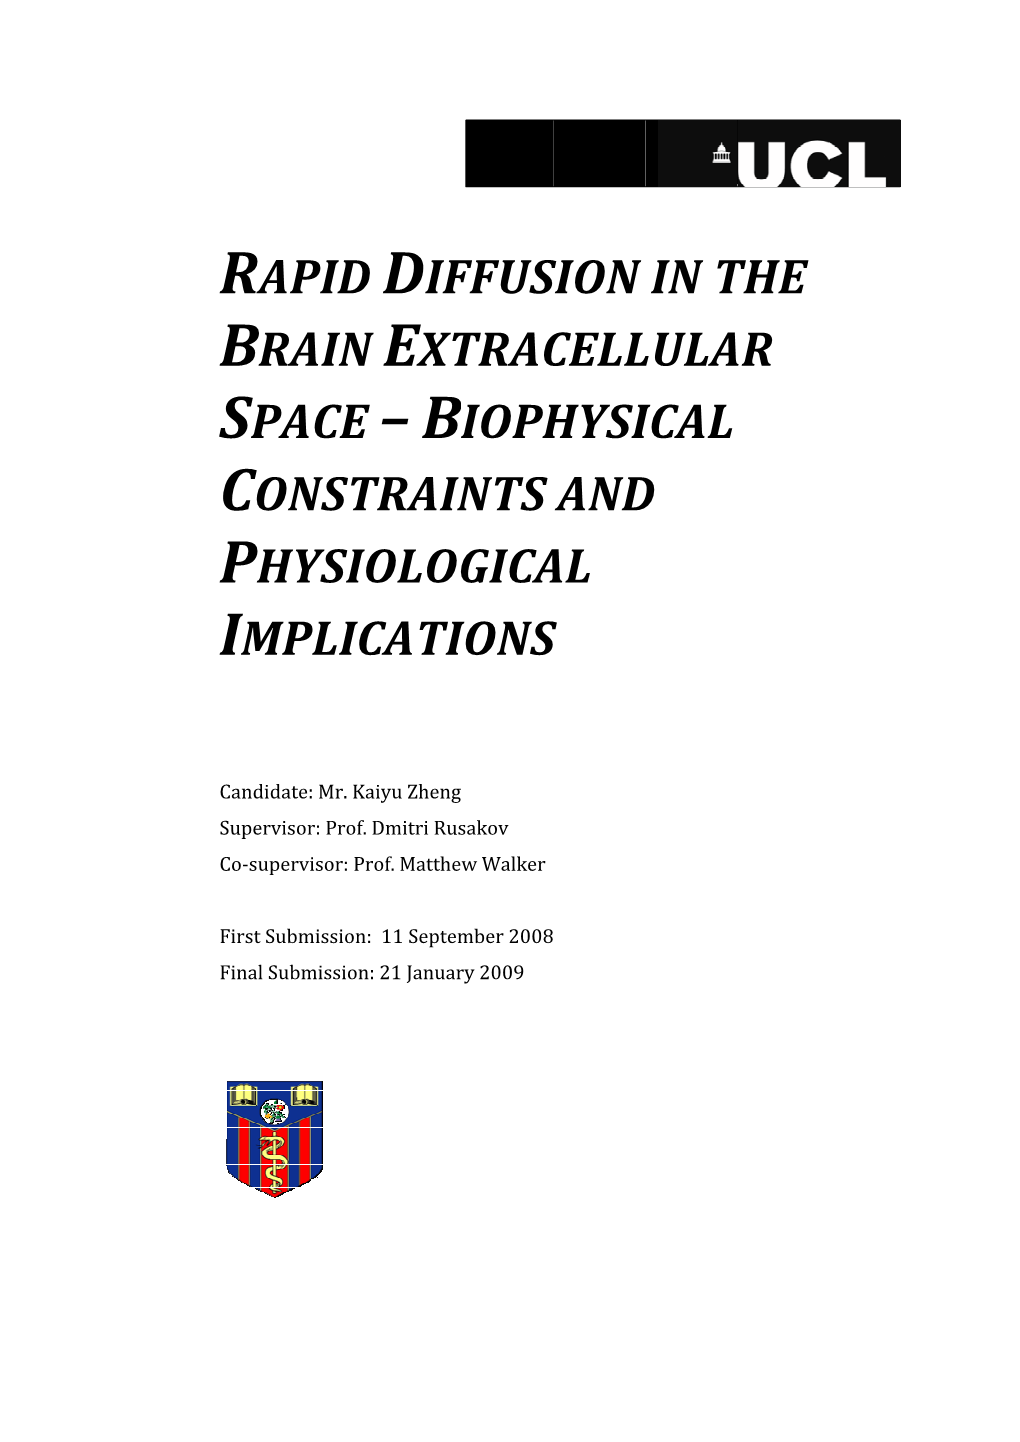 Rapid Diffusion in the Brain Extracellular Space – Biophysical Constraints and Physiological Implications